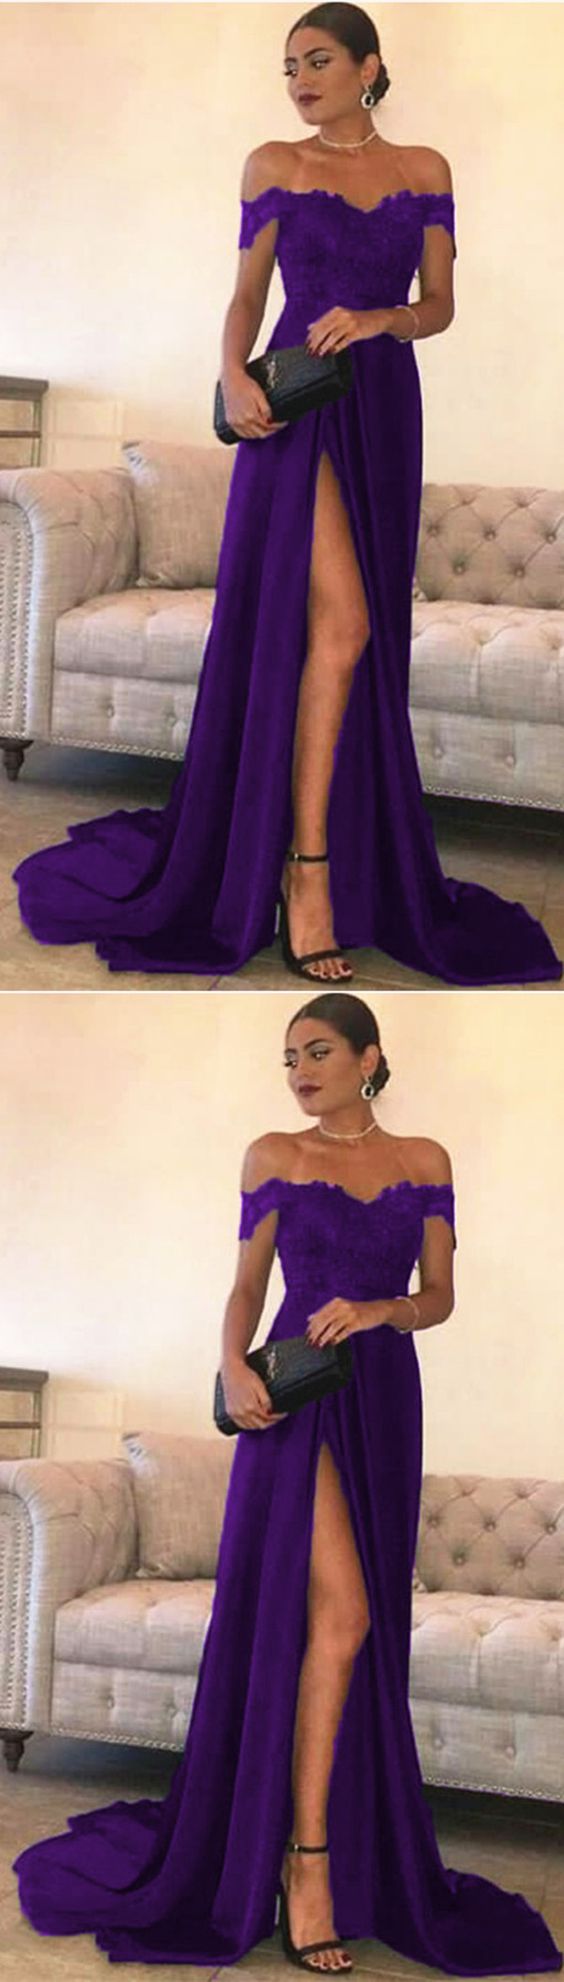 Sexy Leg Slit Long Satin Sweetheart Prom Dresses Lace Off The Shoulder Evening Gowns cg2208